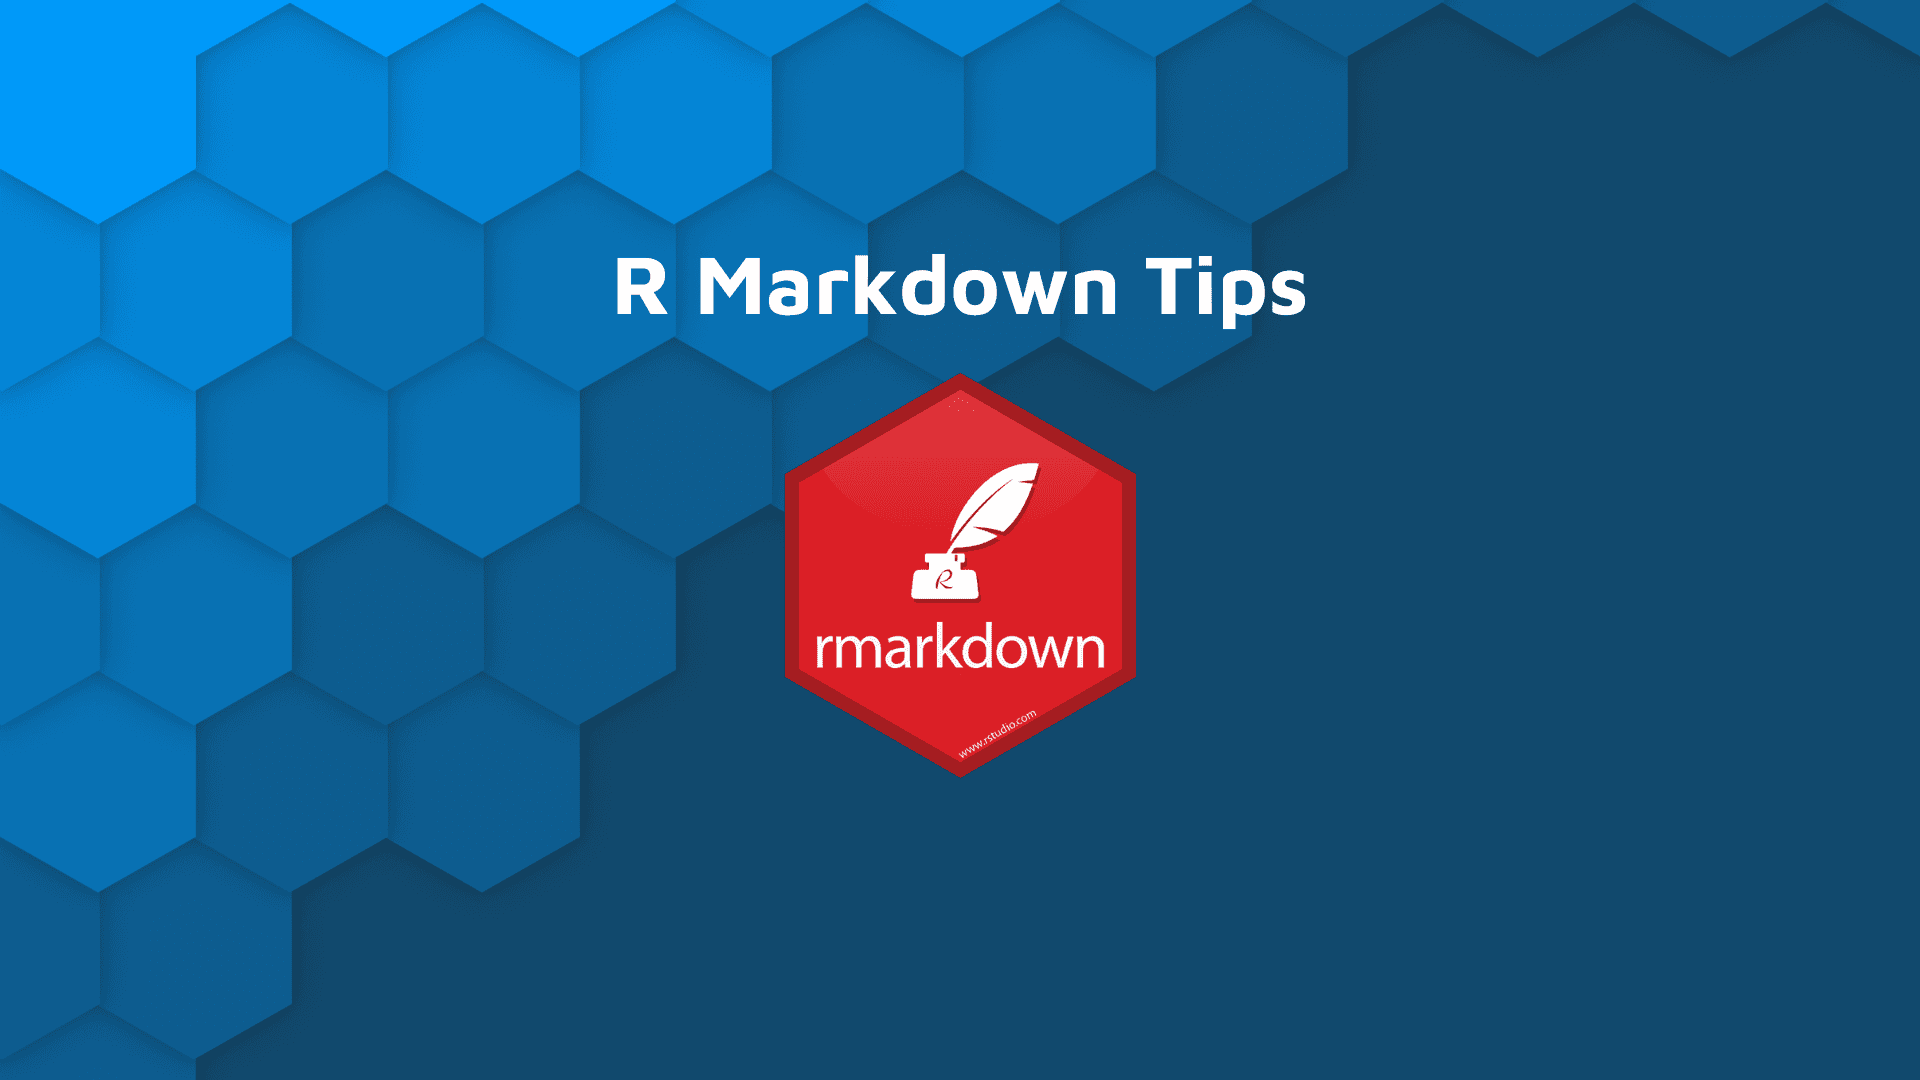 R Markdown tips and tricks hex blog banner with white text, "R Markdown Tips" and the rmarkdown package logo